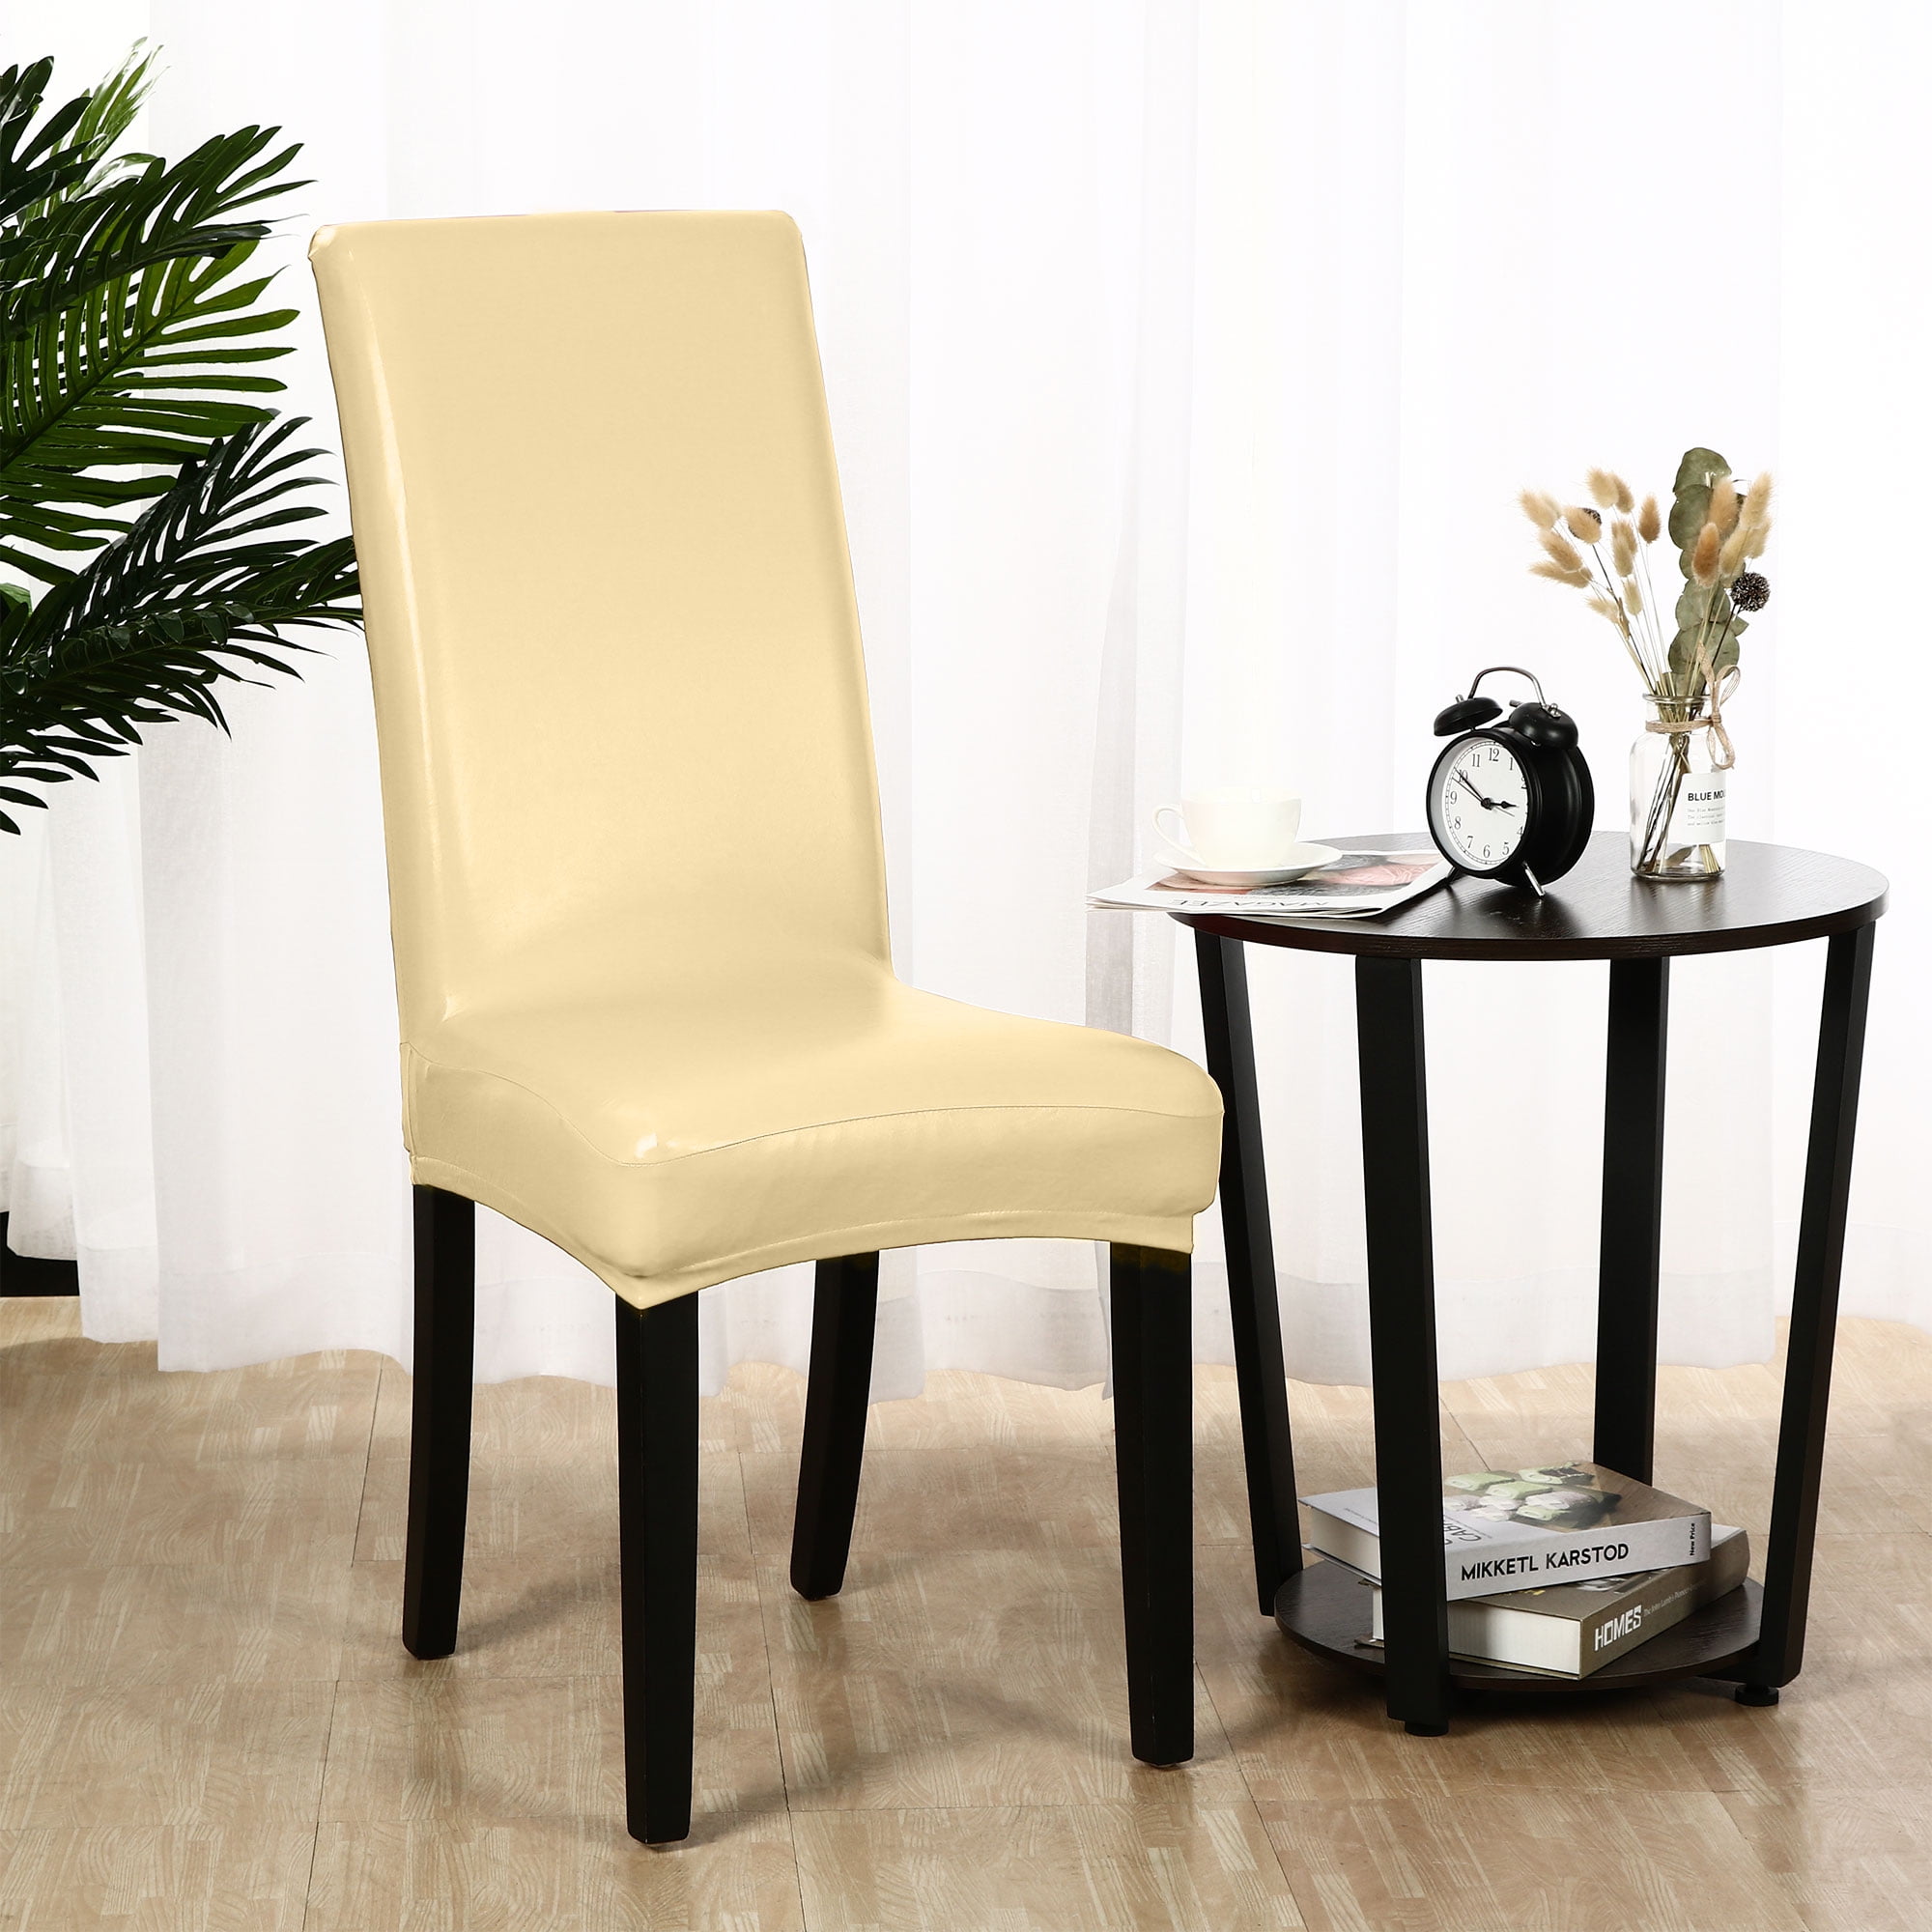 Dining Chair PU Leather Covers Slip Stretch Wedding Banquet Party Waterproof 